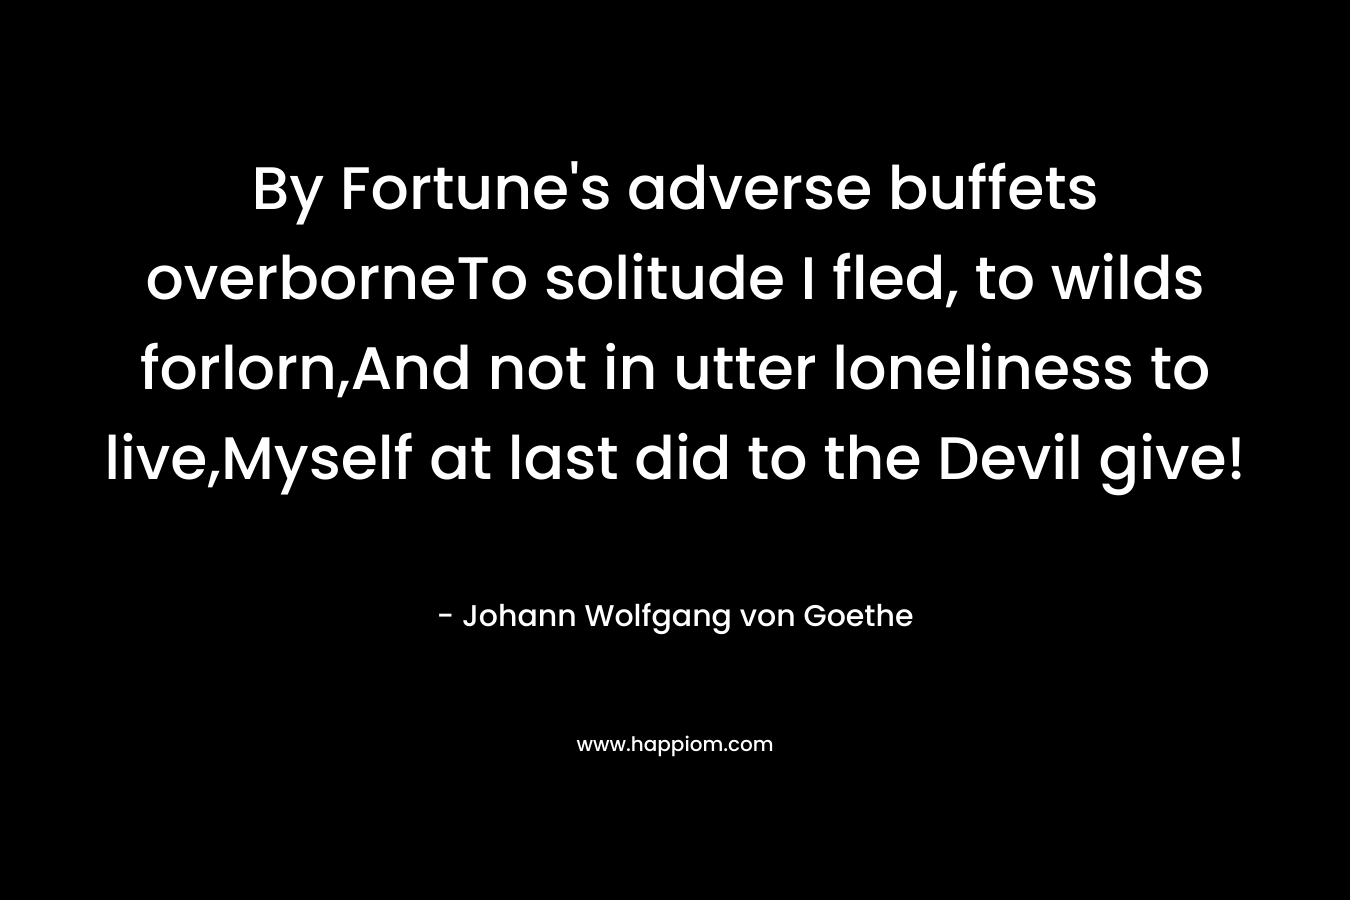 By Fortune’s adverse buffets overborneTo solitude I fled, to wilds forlorn,And not in utter loneliness to live,Myself at last did to the Devil give! – Johann Wolfgang von Goethe